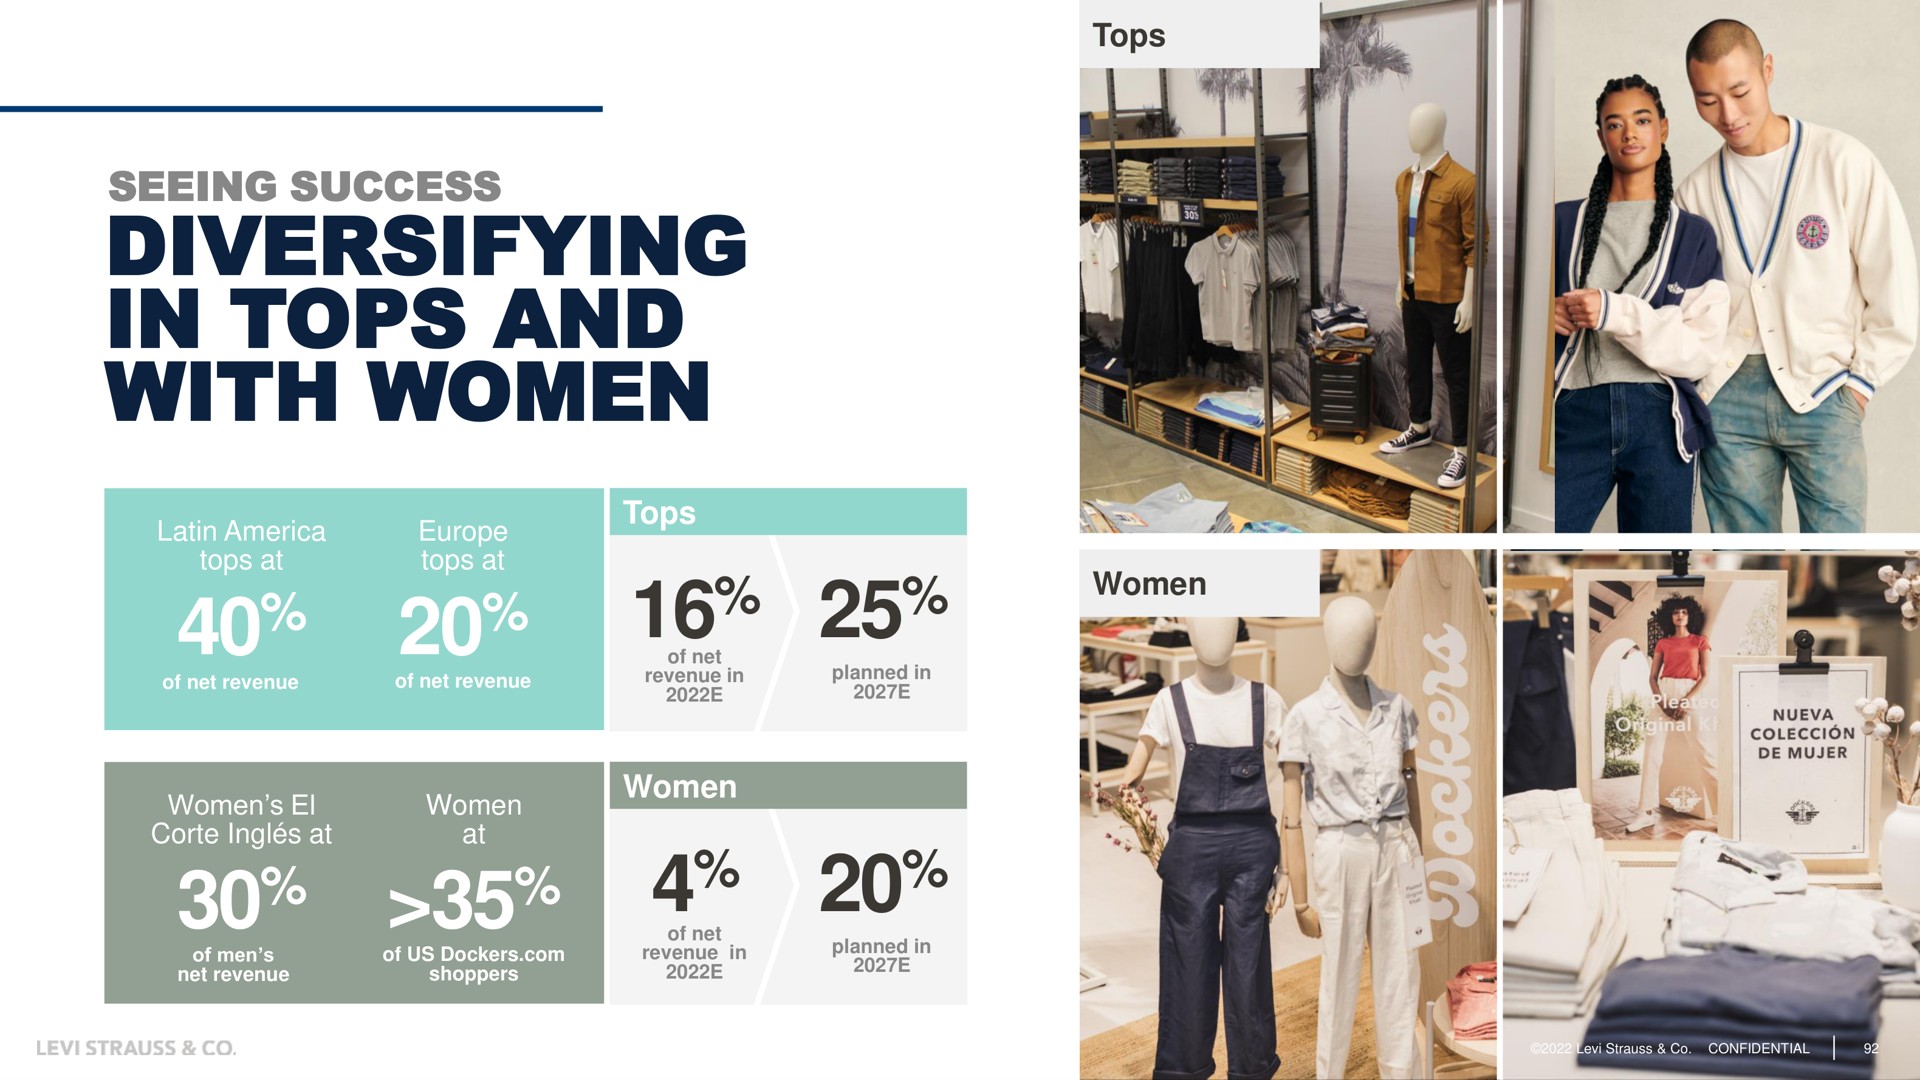 seeing success diversifying in tops and with women | Levi Strauss